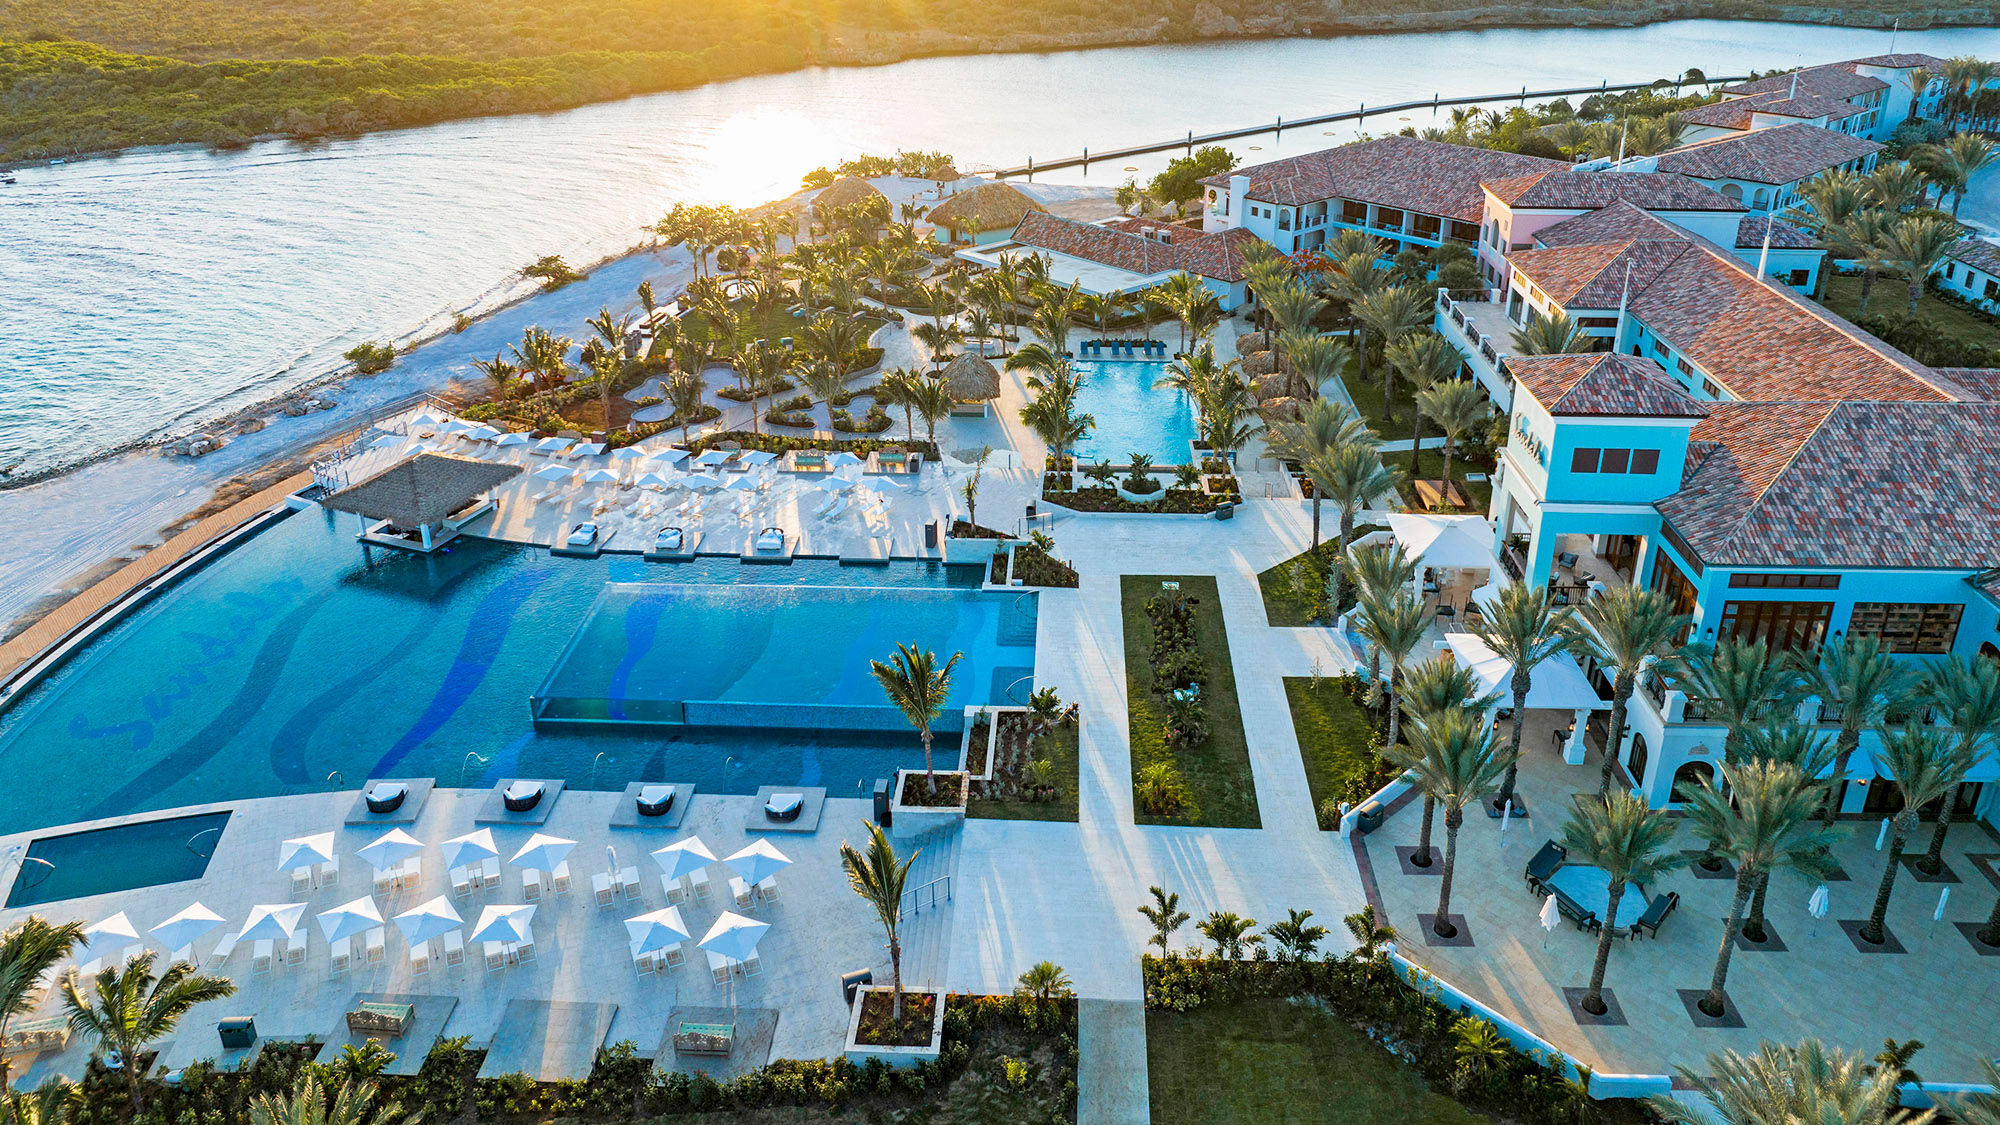 An aerial view of the Sandals Royal Curacao.